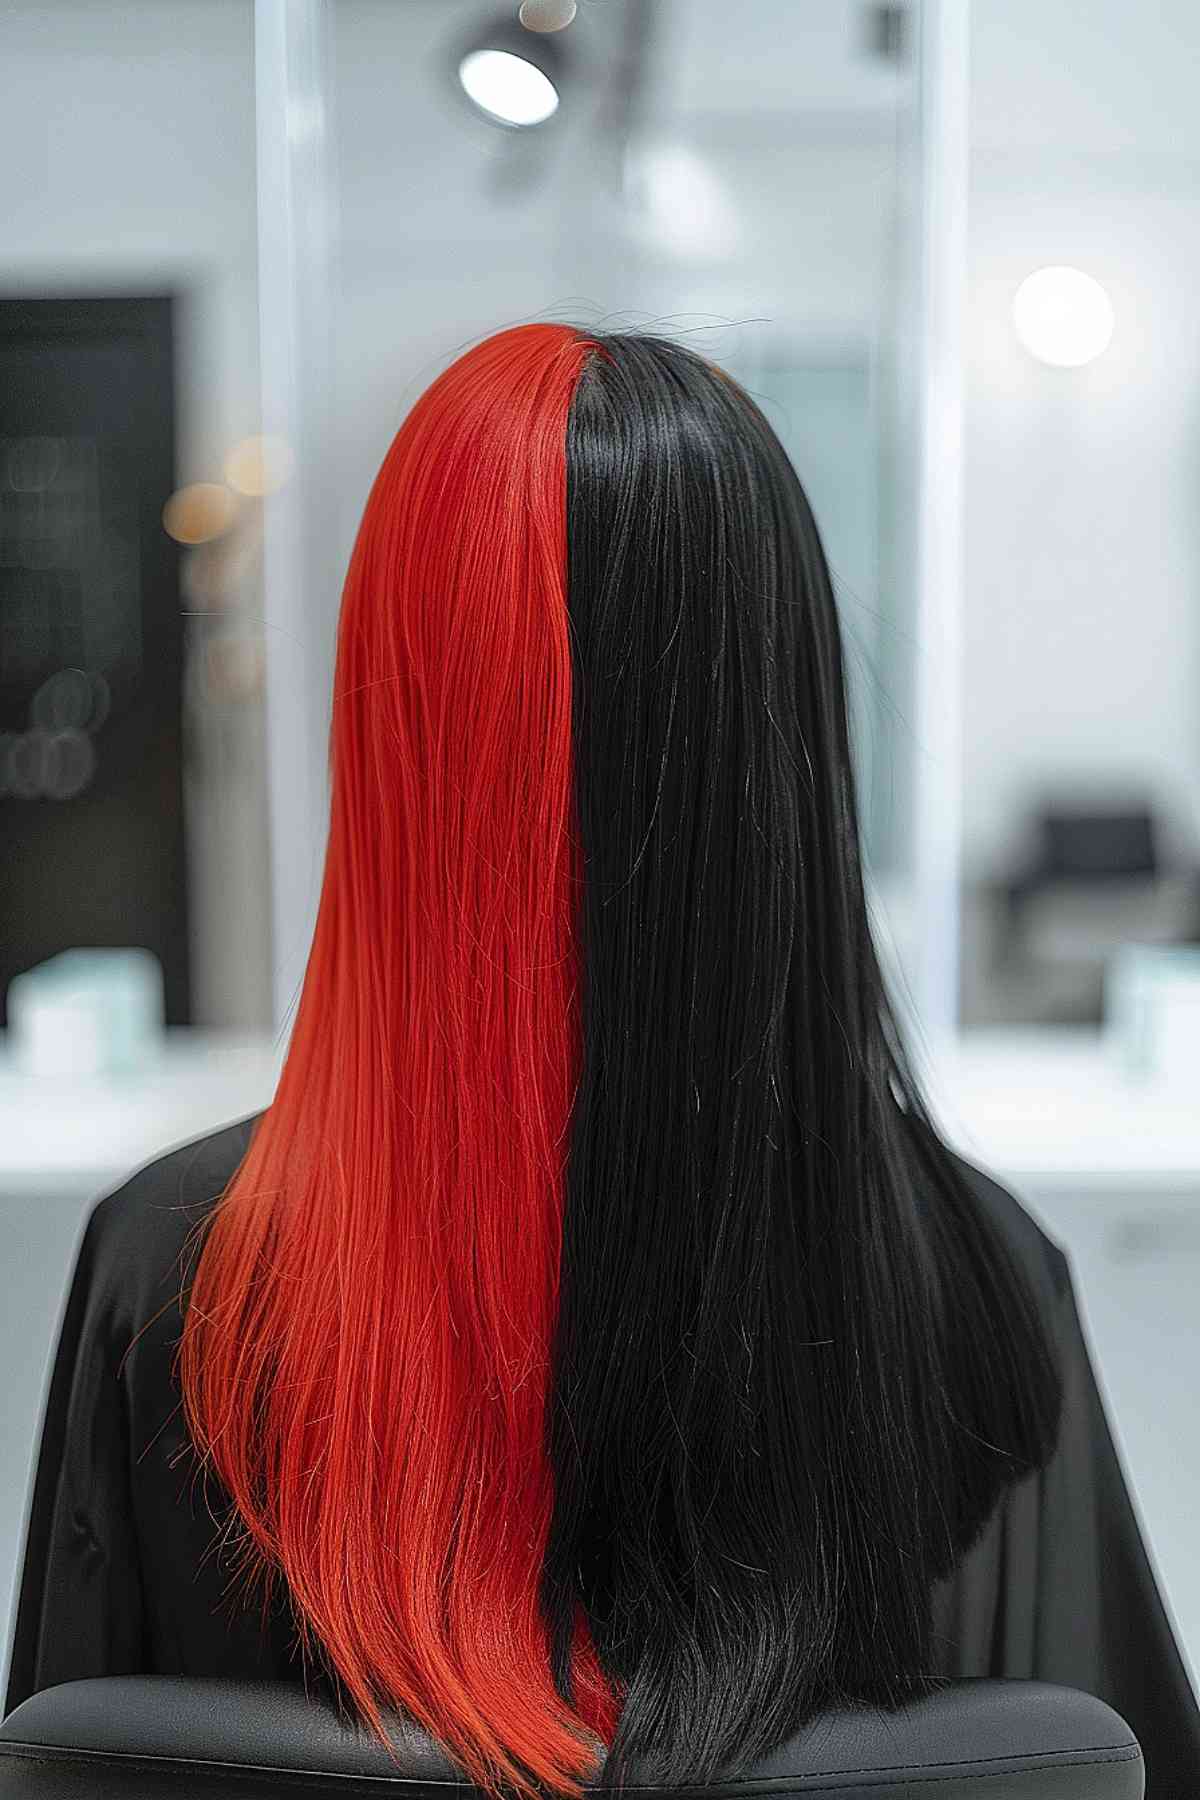 Long, sleek hair with a striking red and black split, exemplifying the Gemini spirit of duality.